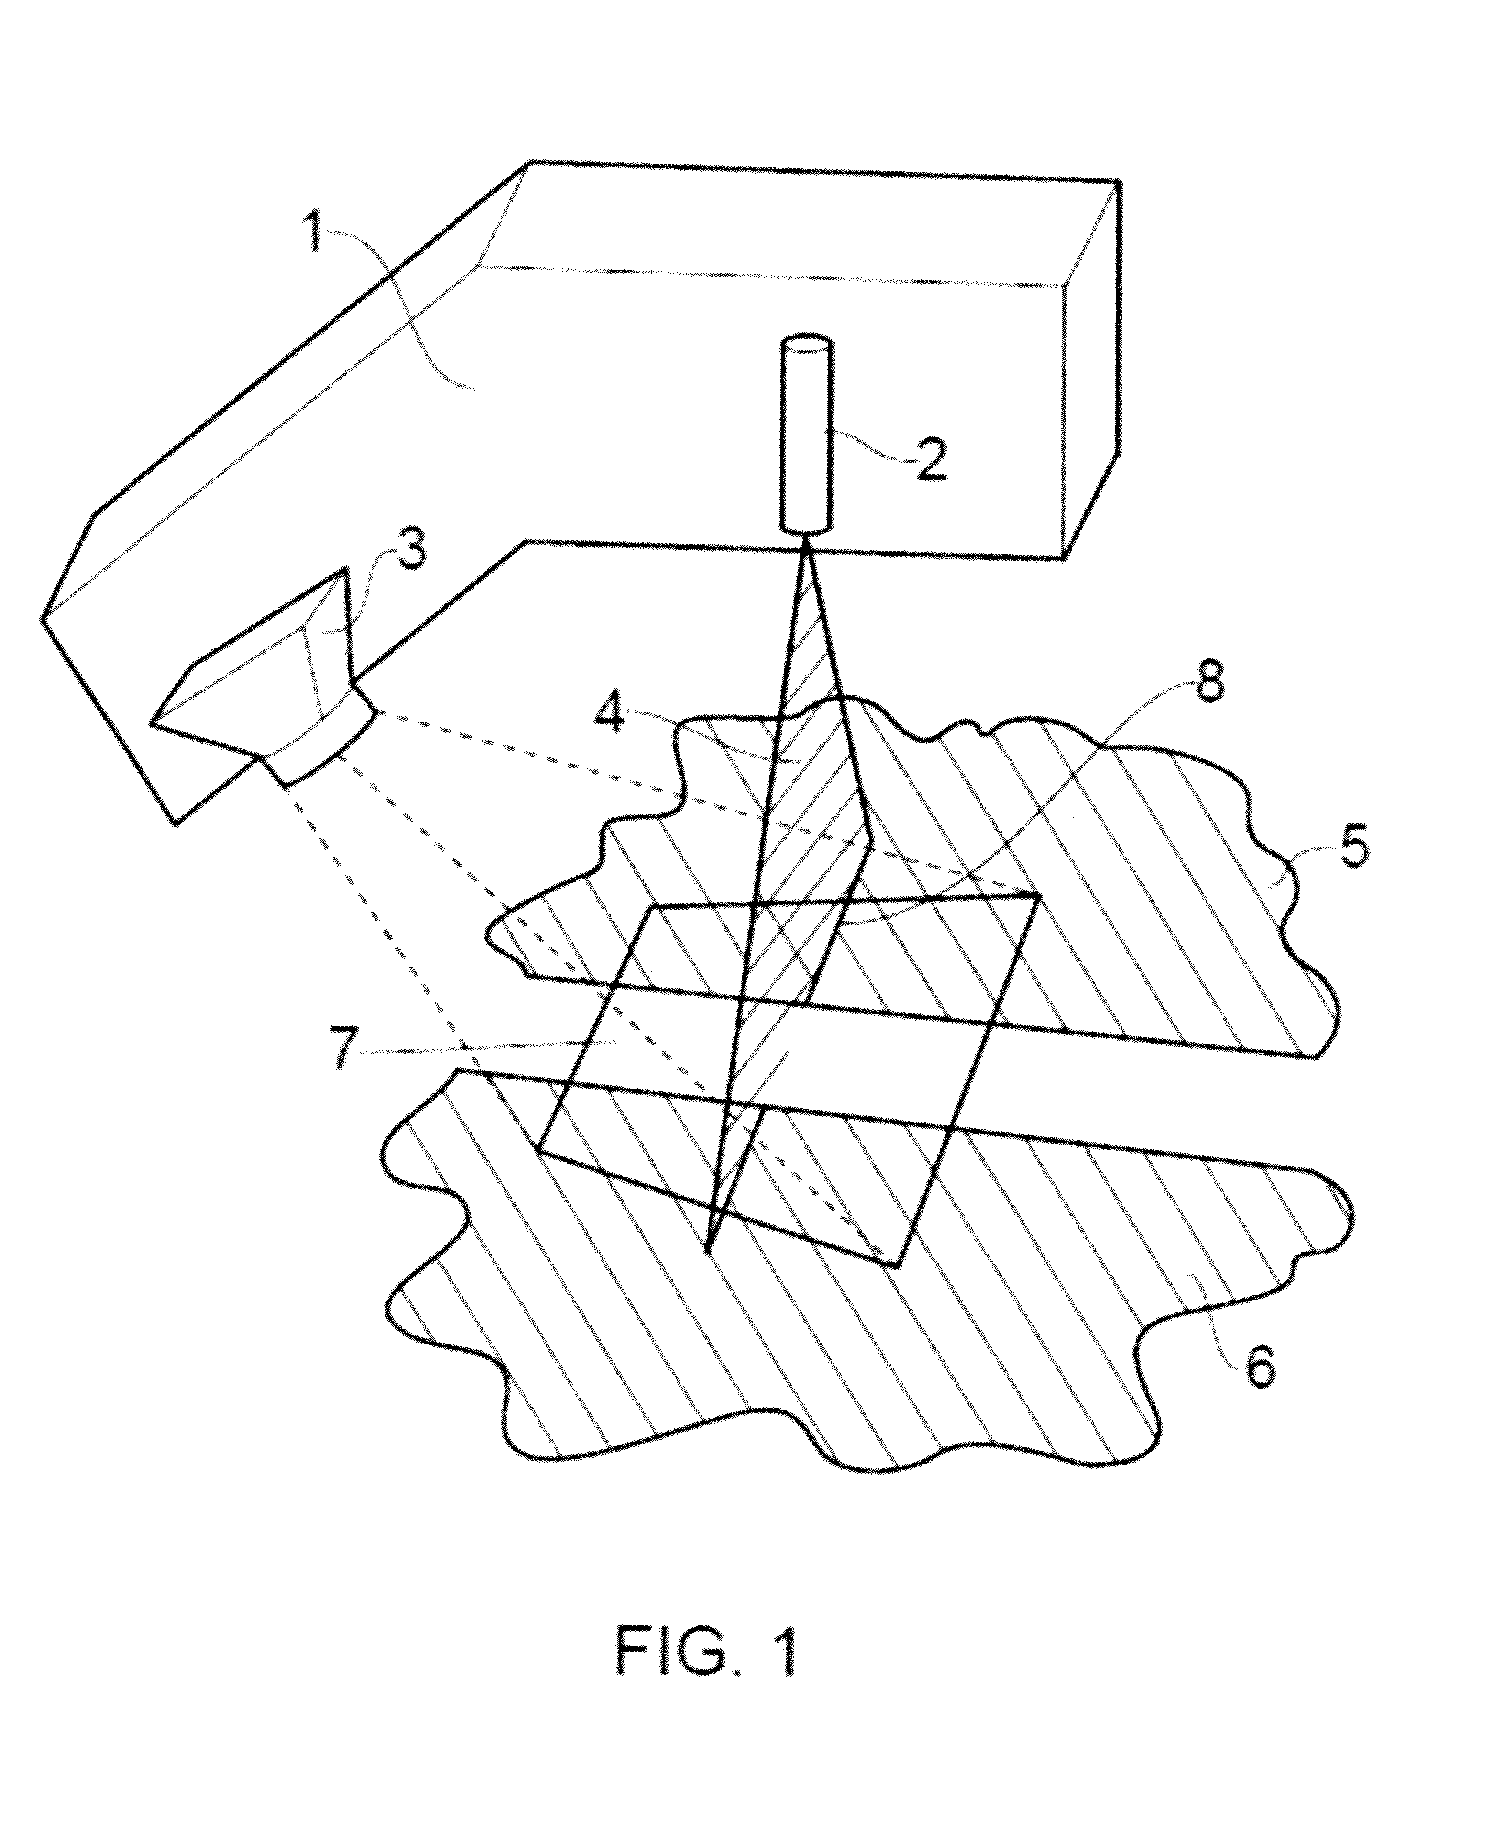 Positioning Device for an Optical Triangulation Sensor